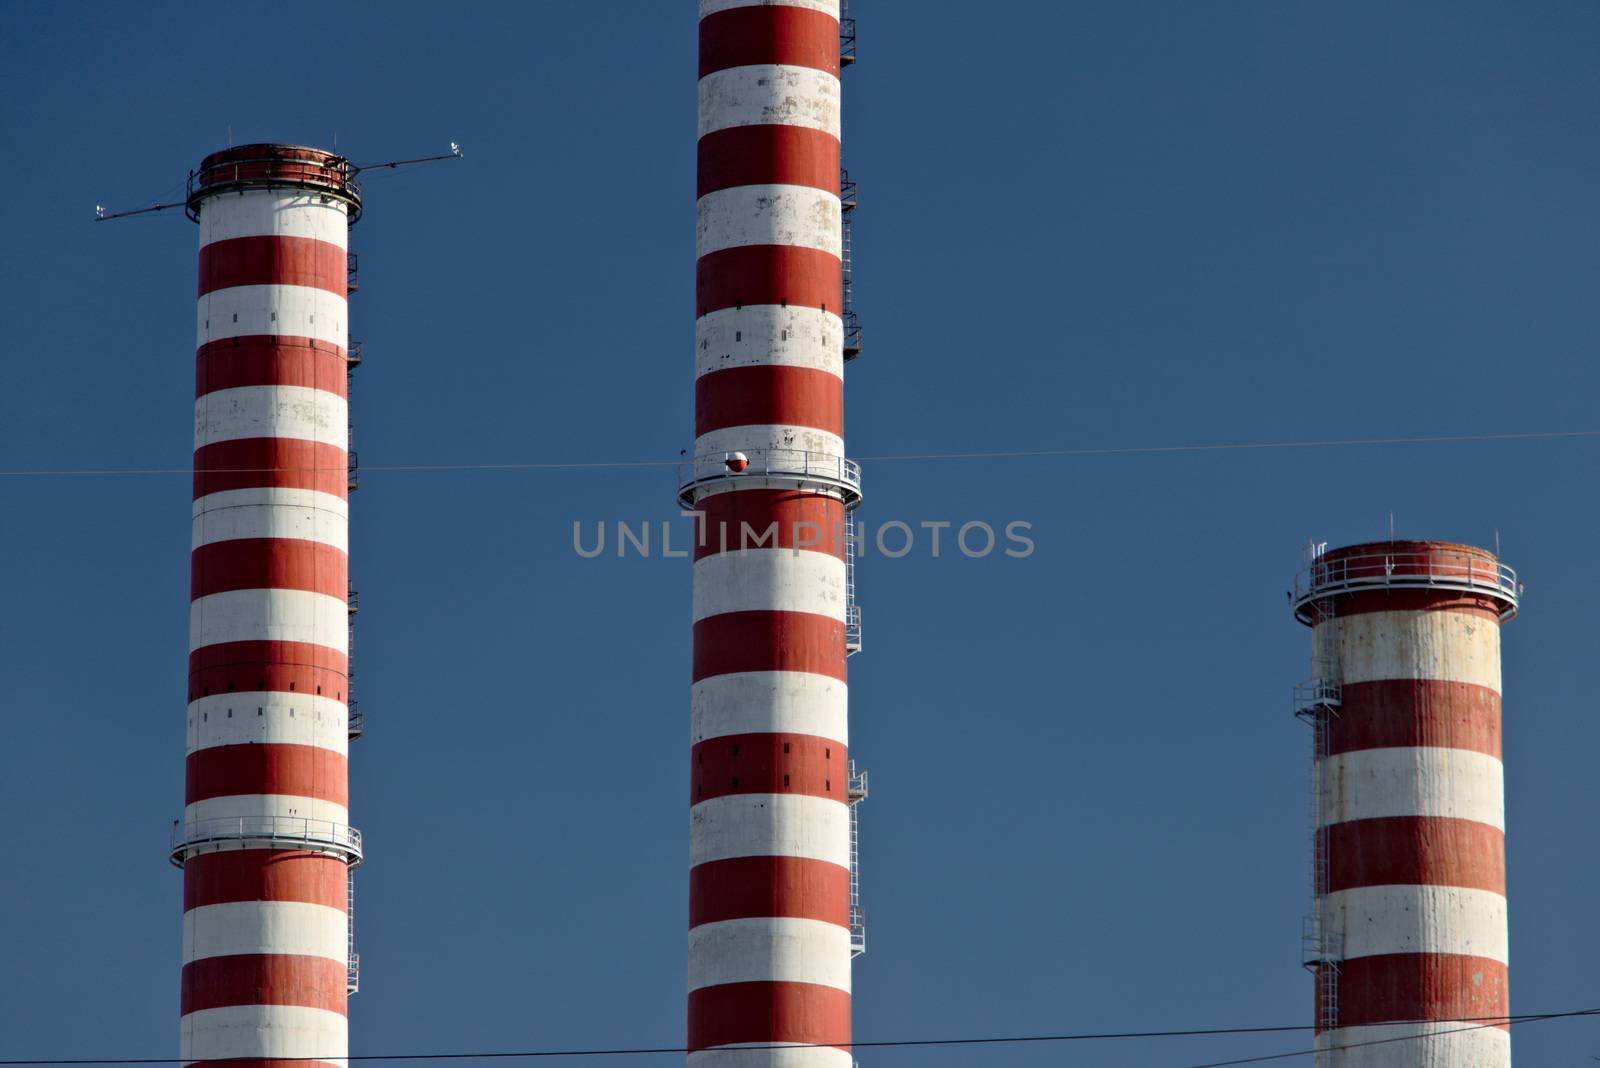 The white and red chimneys belong to the Iren plant in Turbigo, near Milan, Lombardy